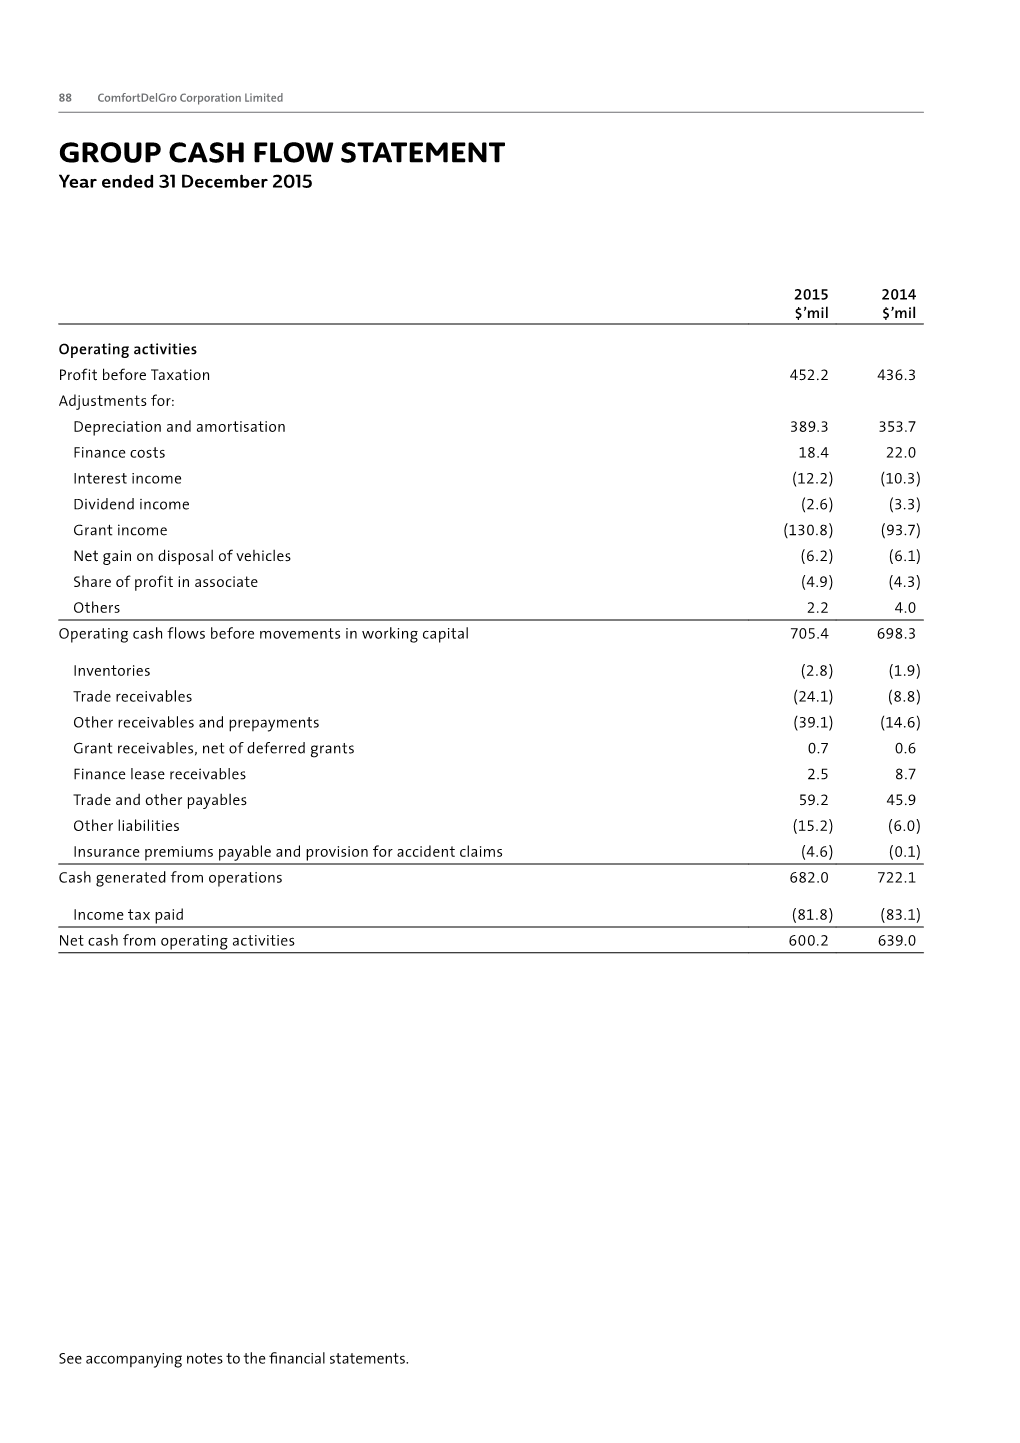 GROUP CASH FLOW STATEMENT Year Ended 31 December 2015